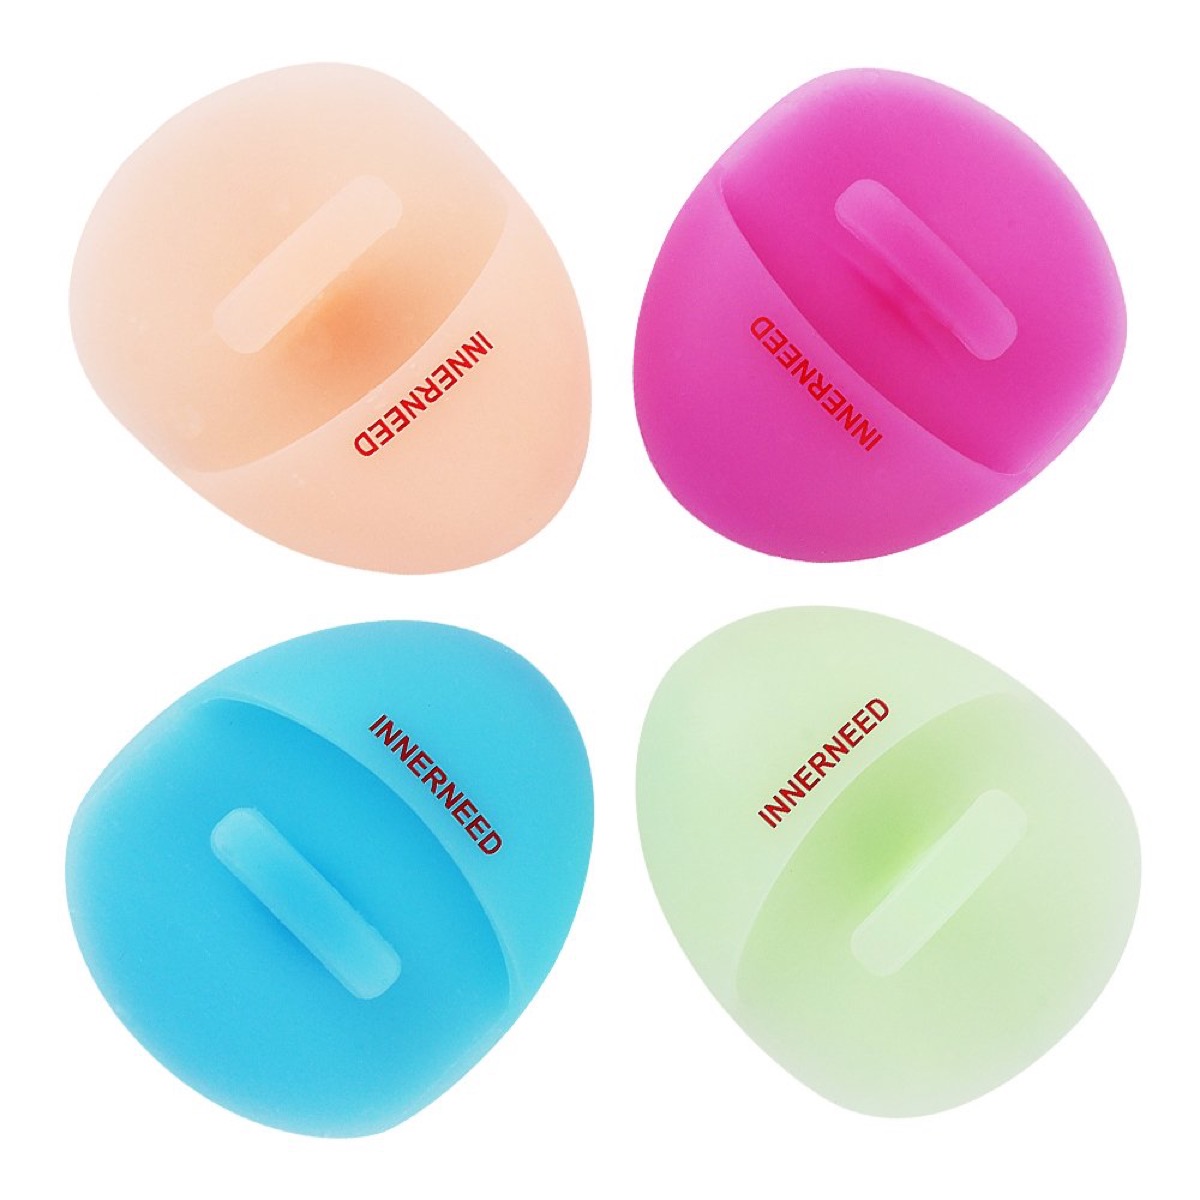 Four colorful silicone face cleansers